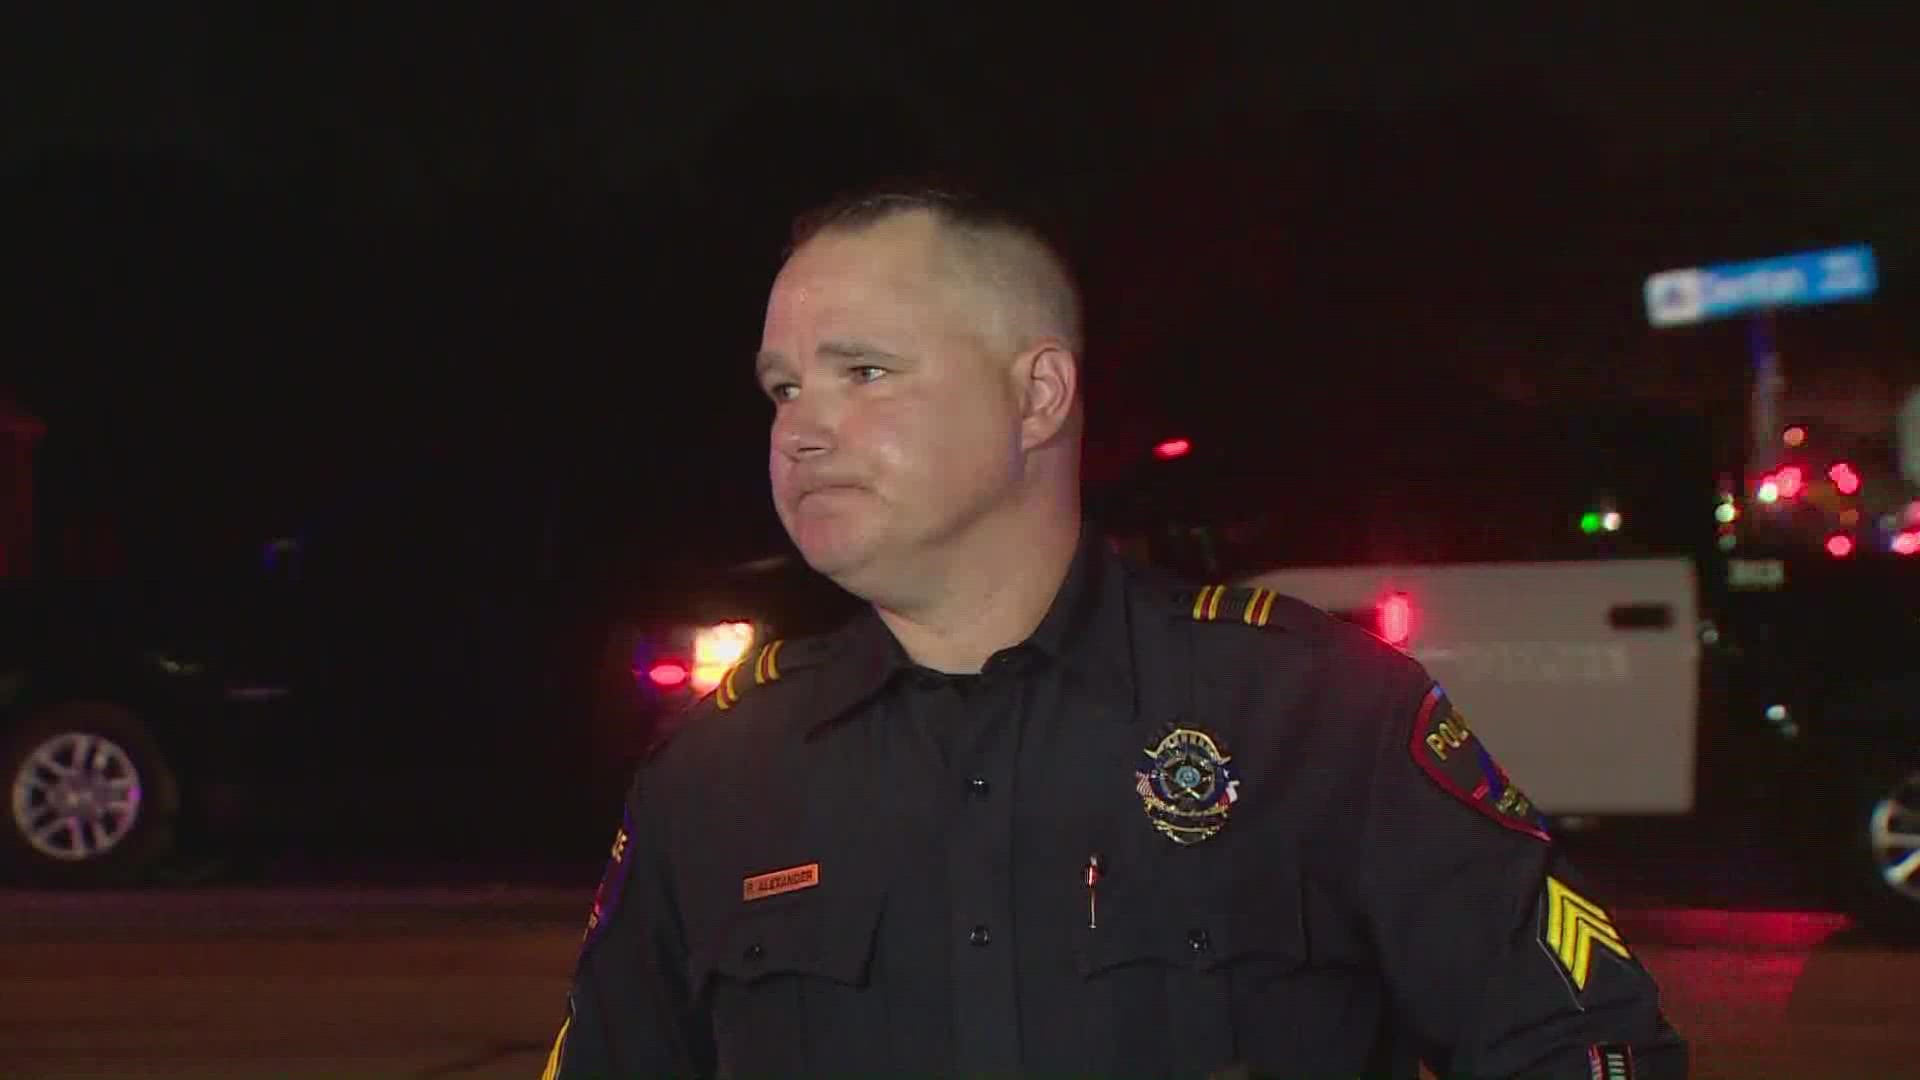 Two people are dead, and four others, including three officers, were injured in a shooting incident in a neighborhood in Haltom City on Saturday night, police said.